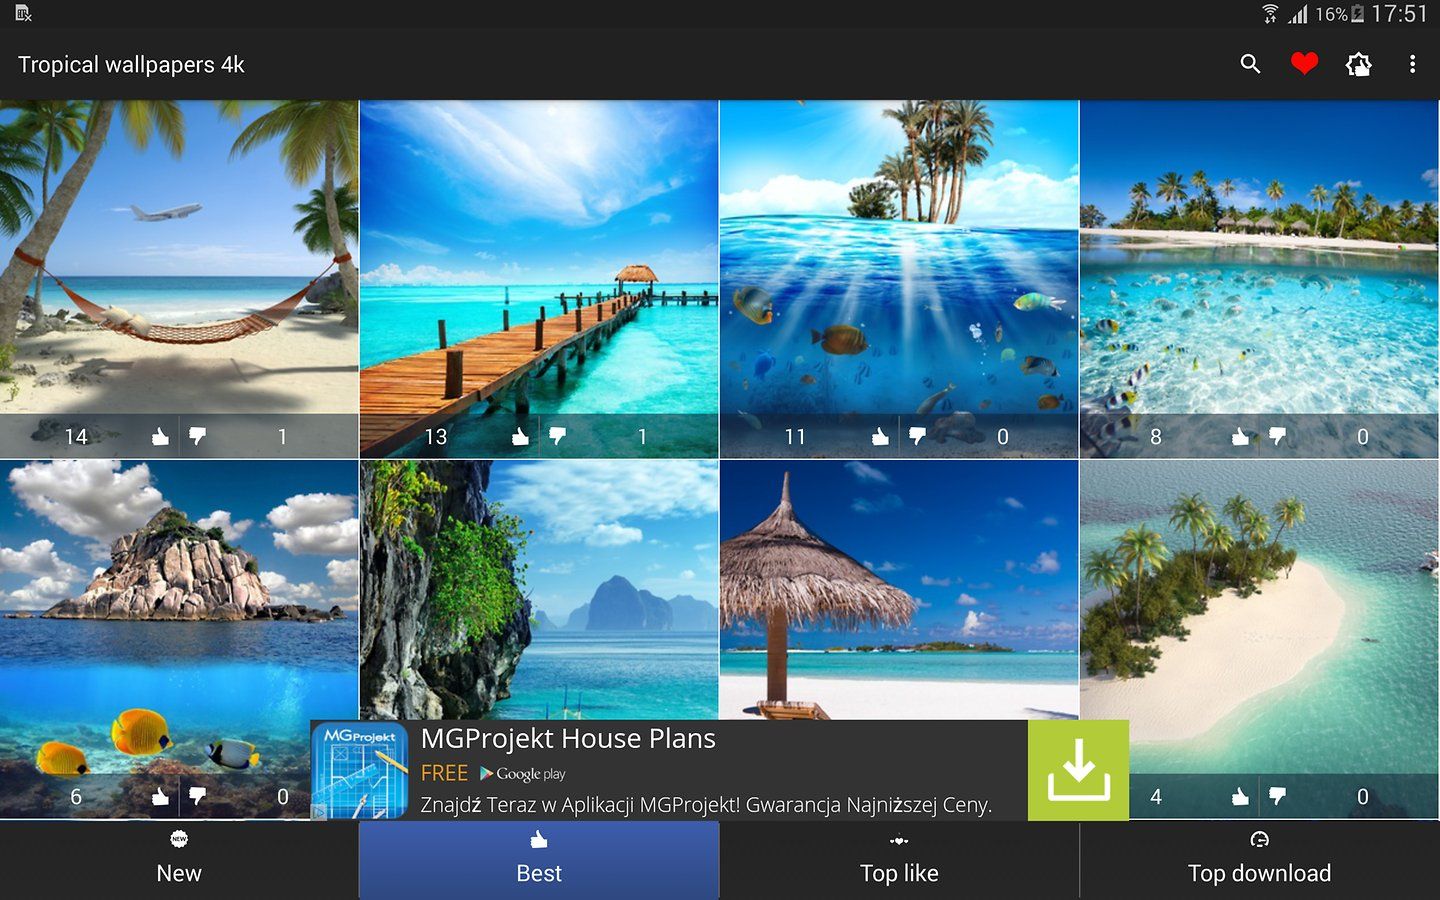 Tropical Wallpapers 4k - Android Apps and Tests - AndroidPIT